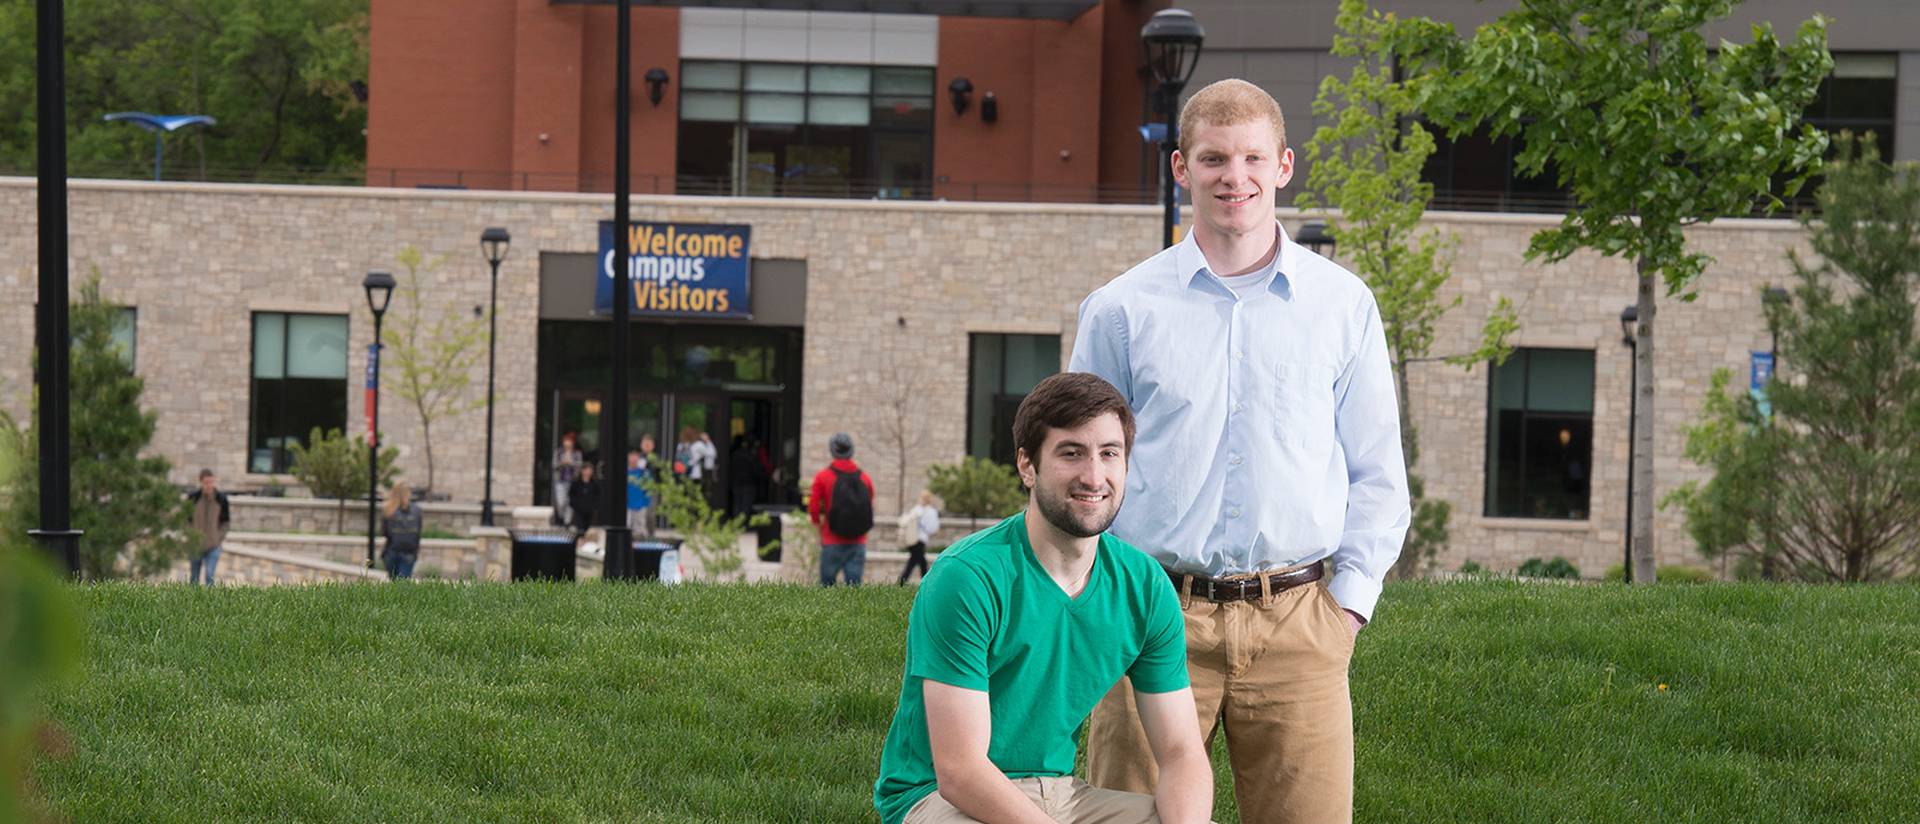 Recent UW-Eau Claire biology graduates Jared Metropulos, left, and Brandon Stradel have been accepted to the inaugural class of the Medical College of Wisconsin-Green Bay.